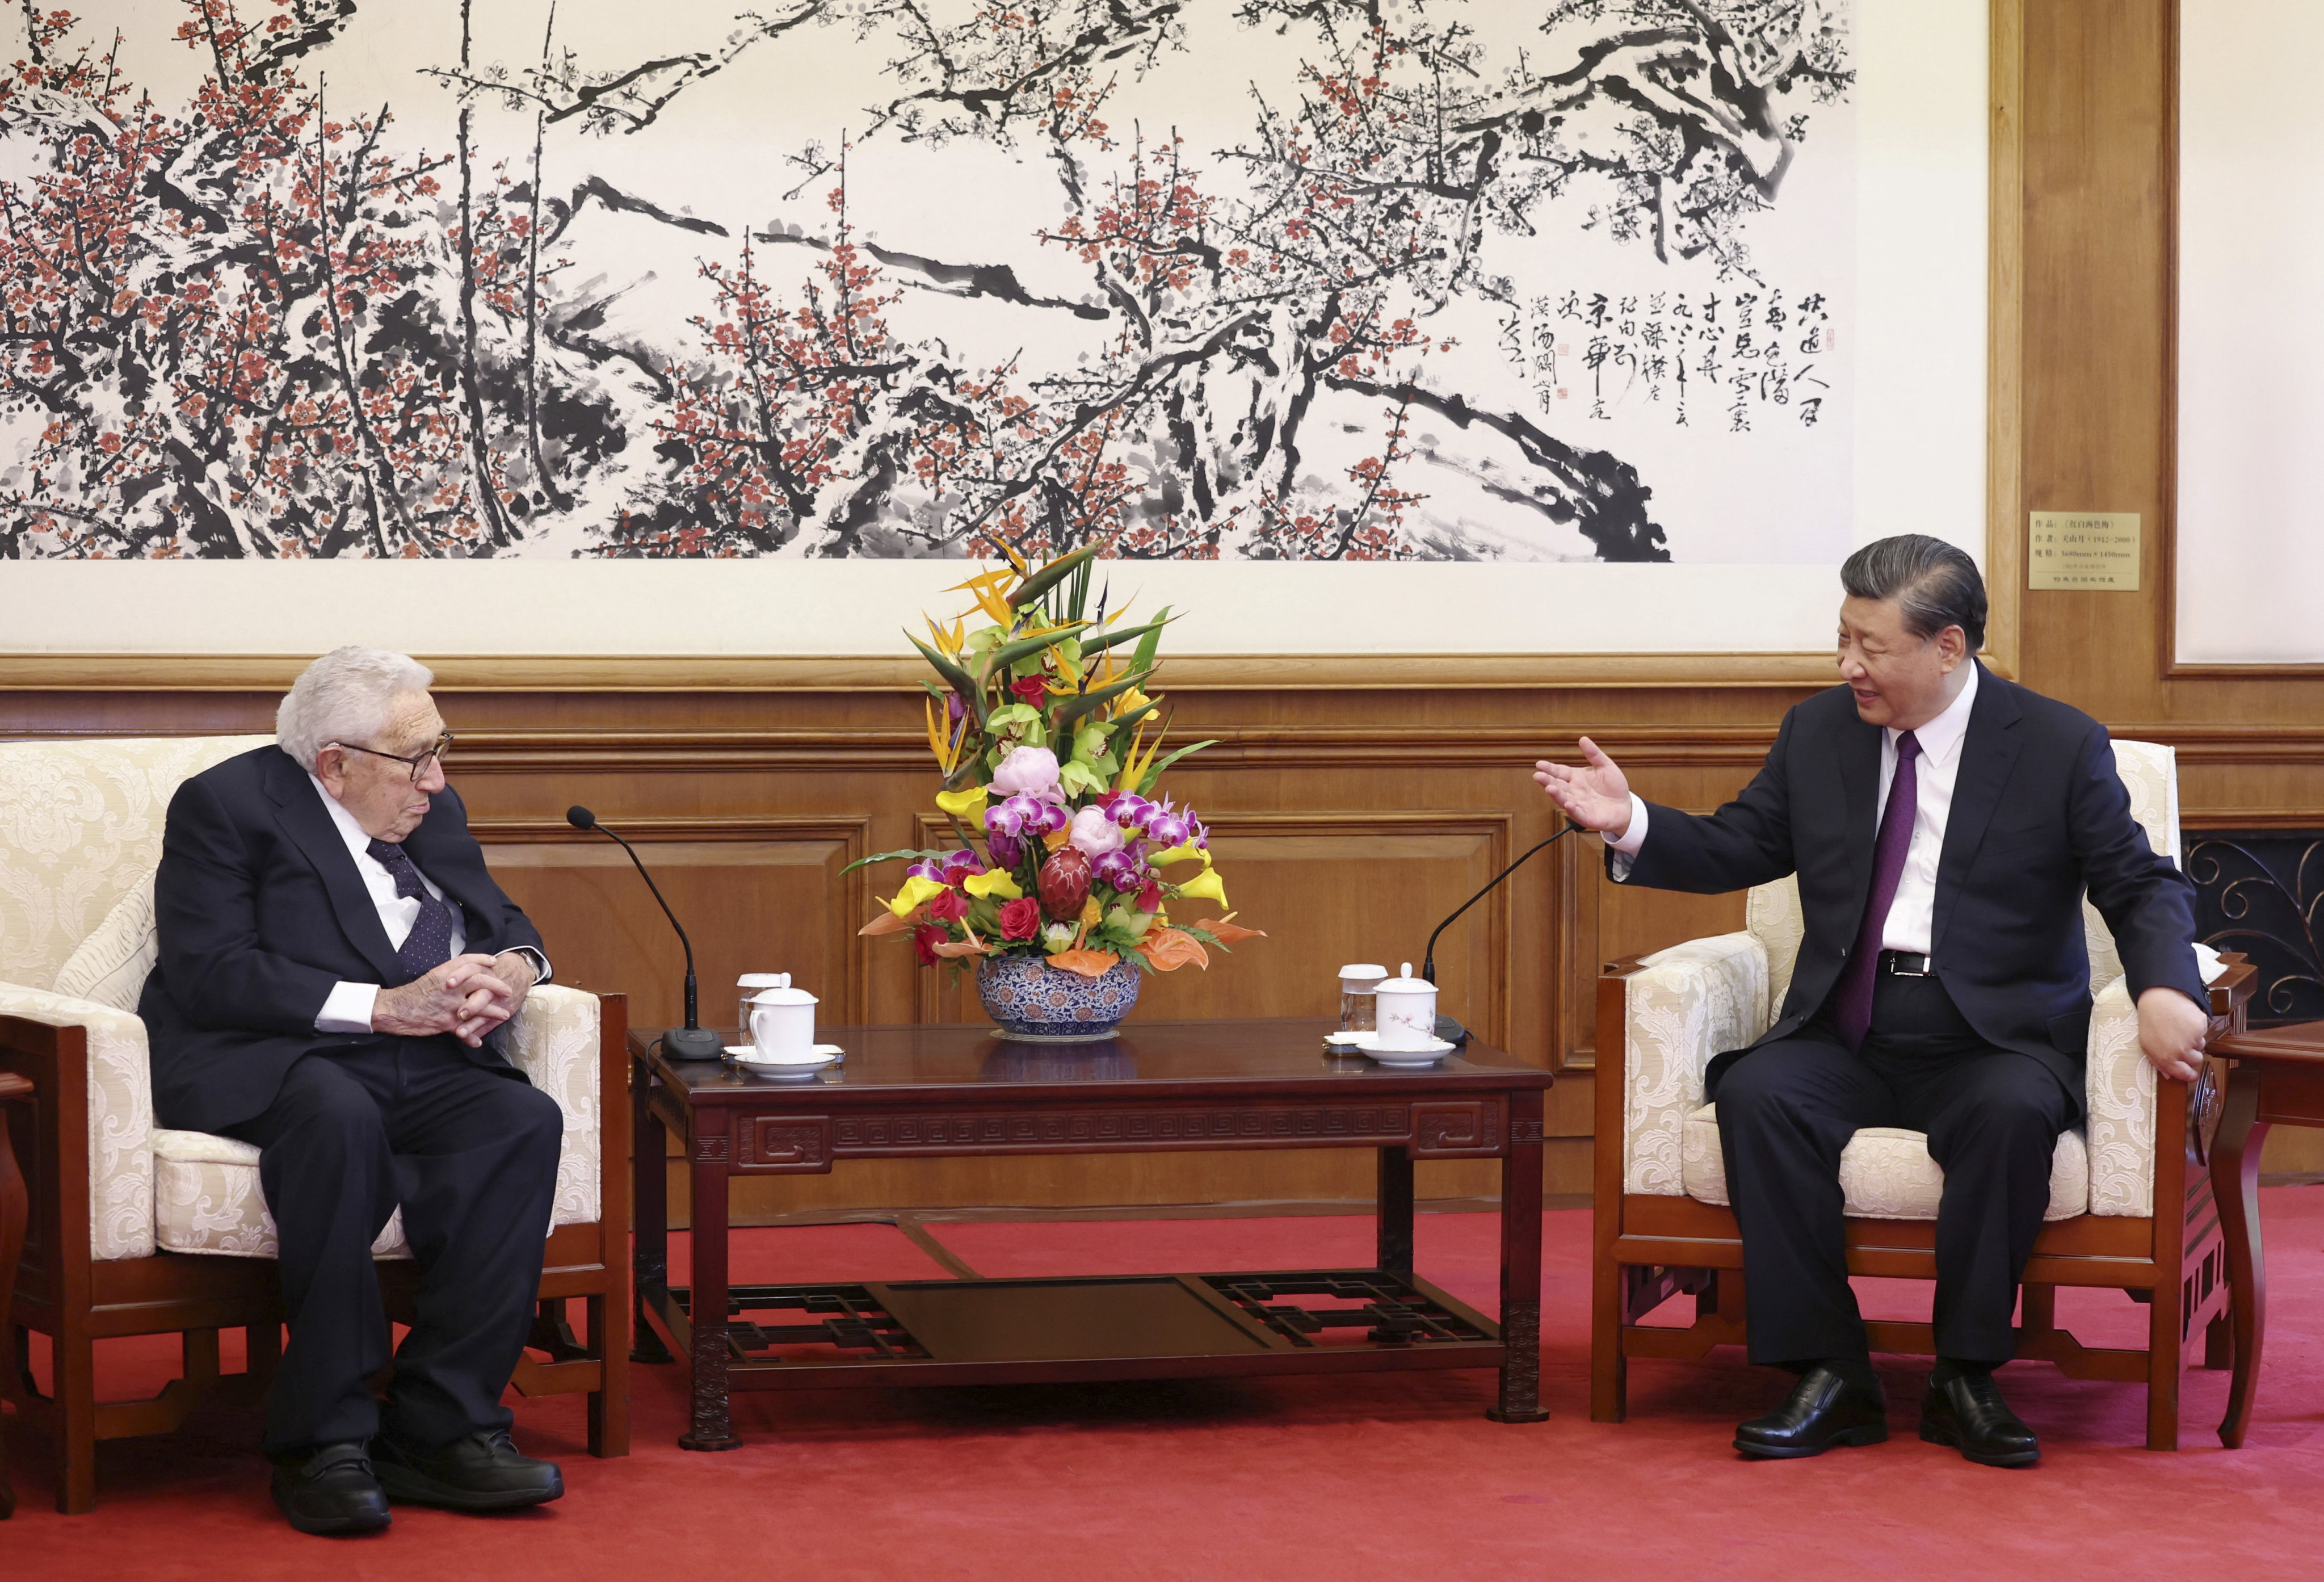 Chinese President Xi Jinping and former US secretary of state Henry Kissinger attended an elaborate lunch at the Diaoyutai State Guesthouse in Beijing. Photo: China Daily via Reuters